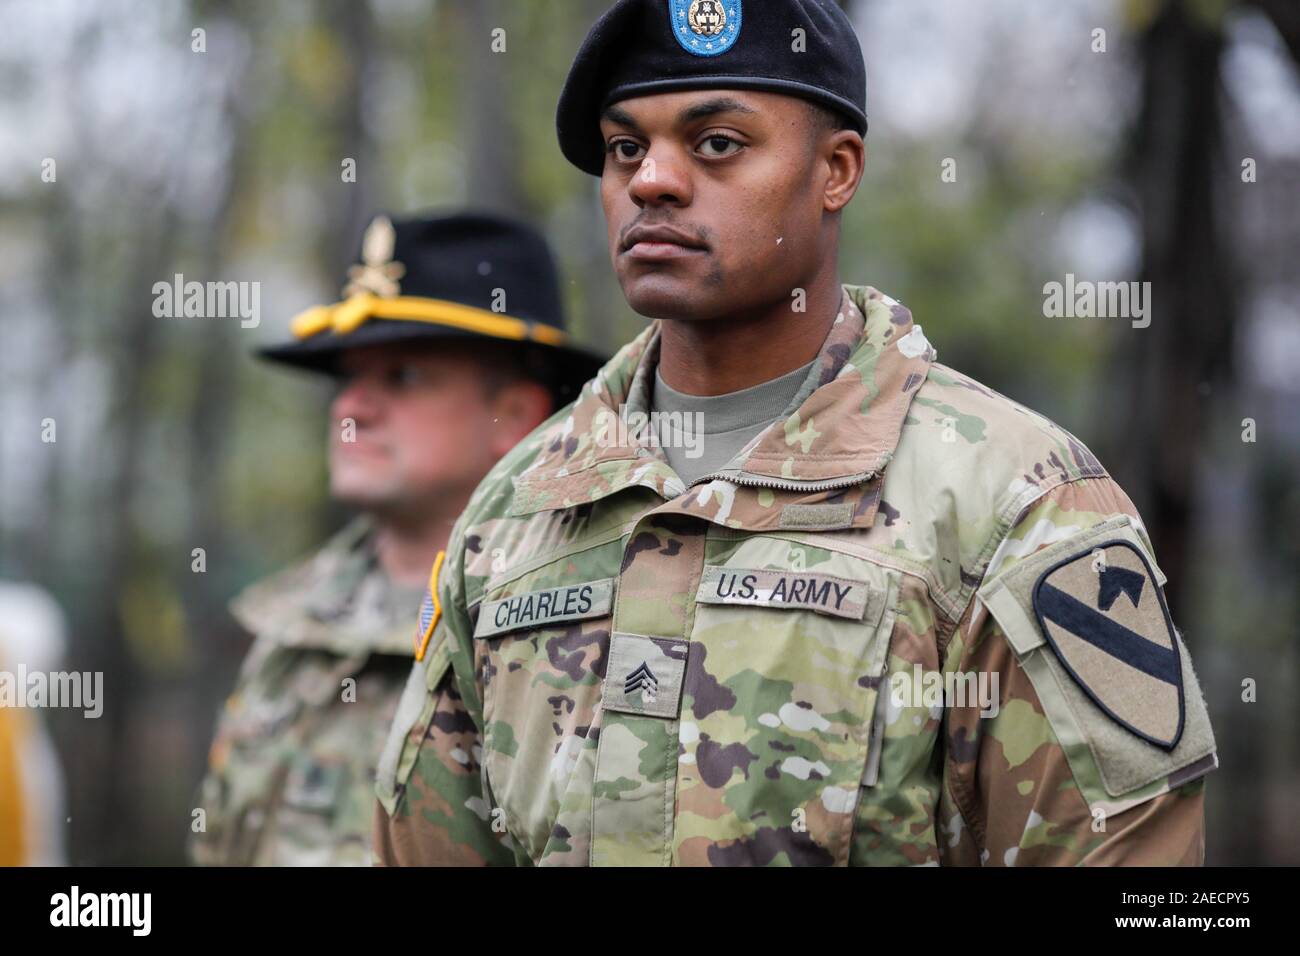 Bucharest, Romania - December 01, 2019: US Army soldiers of the 1st Cavalry Division take part at the Romanian National Day military parade. Stock Photo